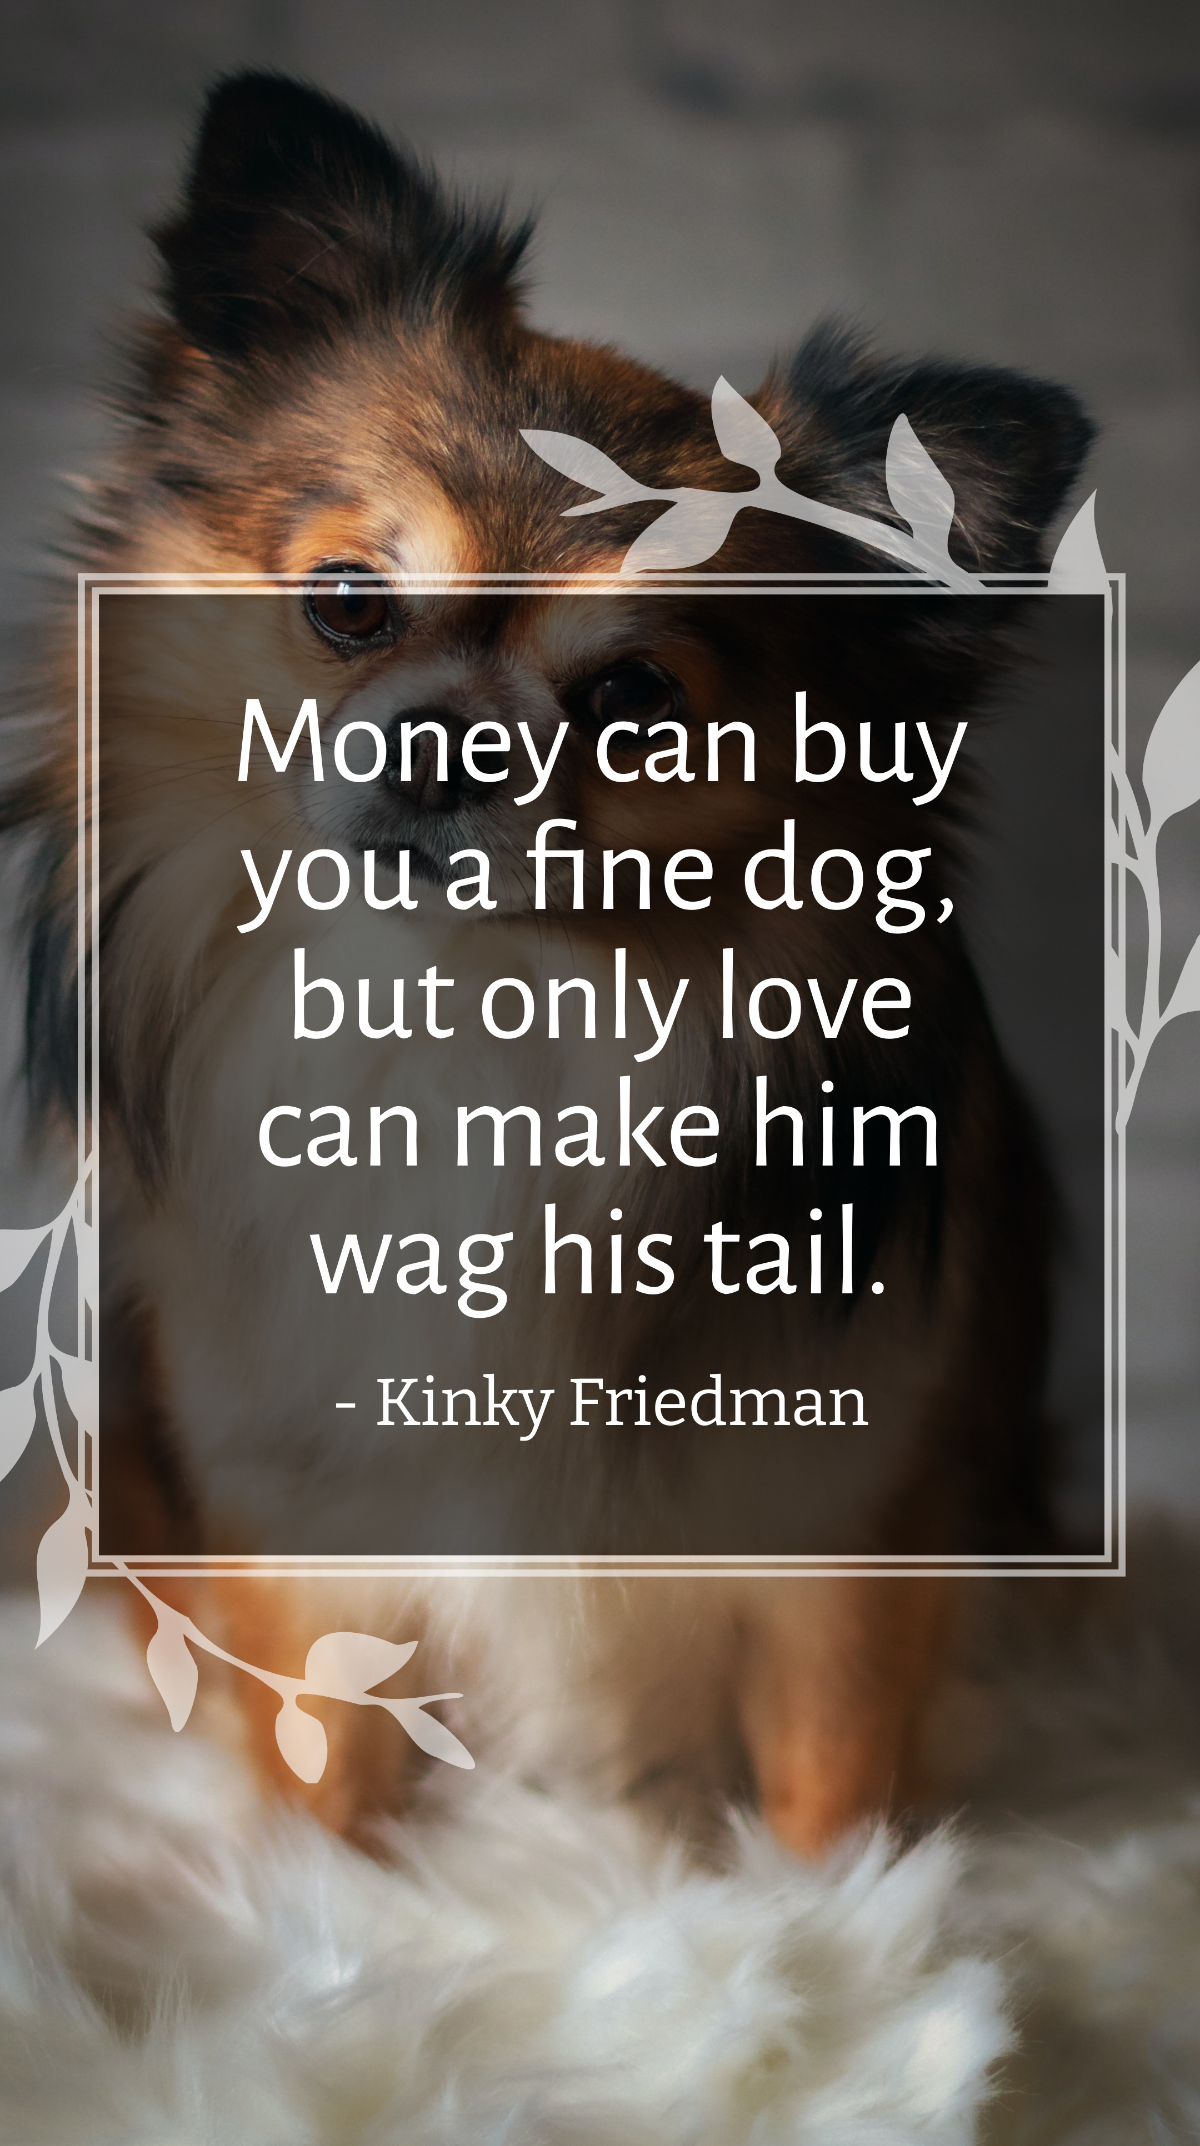 Kinky Friedman - Money can buy you a fine dog, but only love can make him wag his tail.